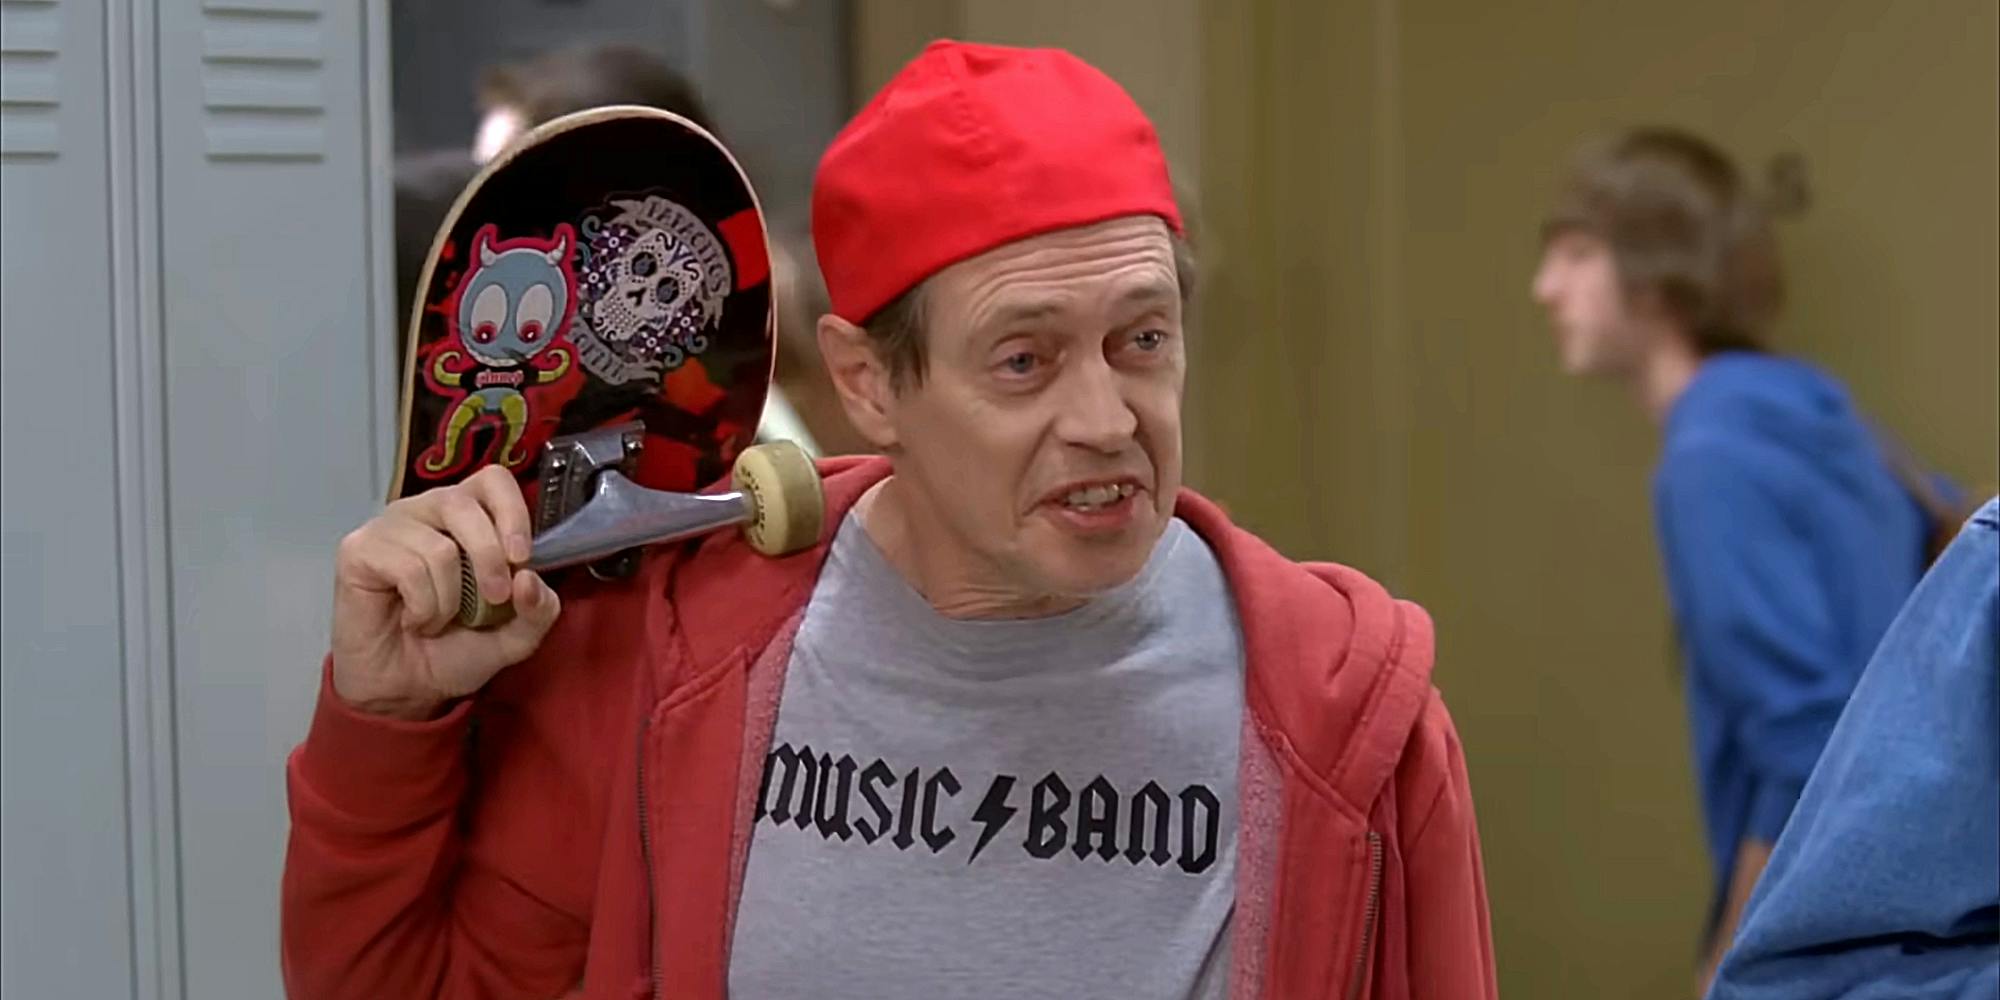 steve buscemi wearing "music band" t-shirt and carrying a skateboard